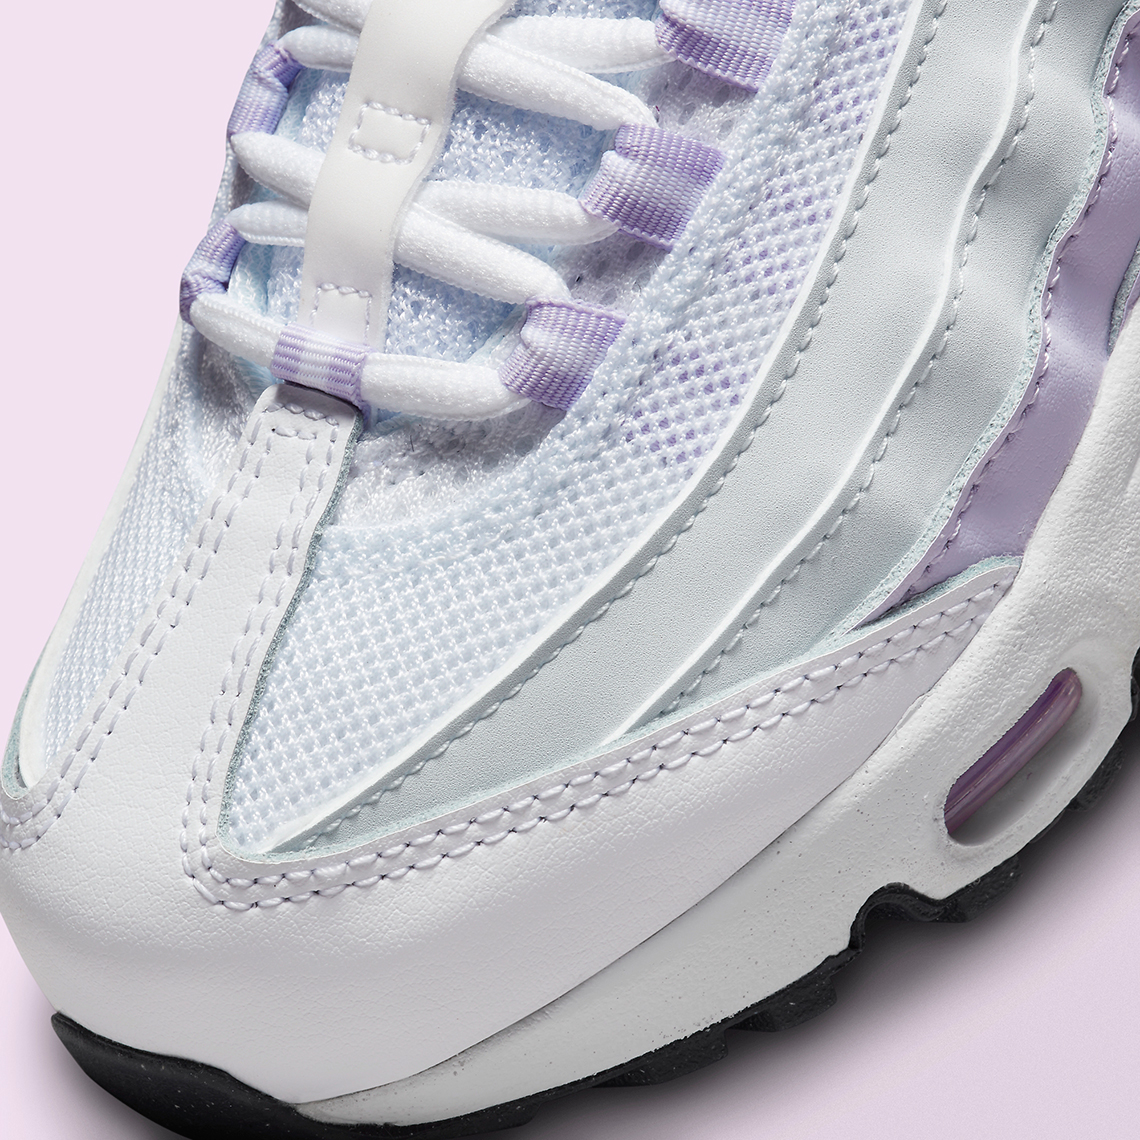 nike air max 95 gs violet frost CJ3906 108 4